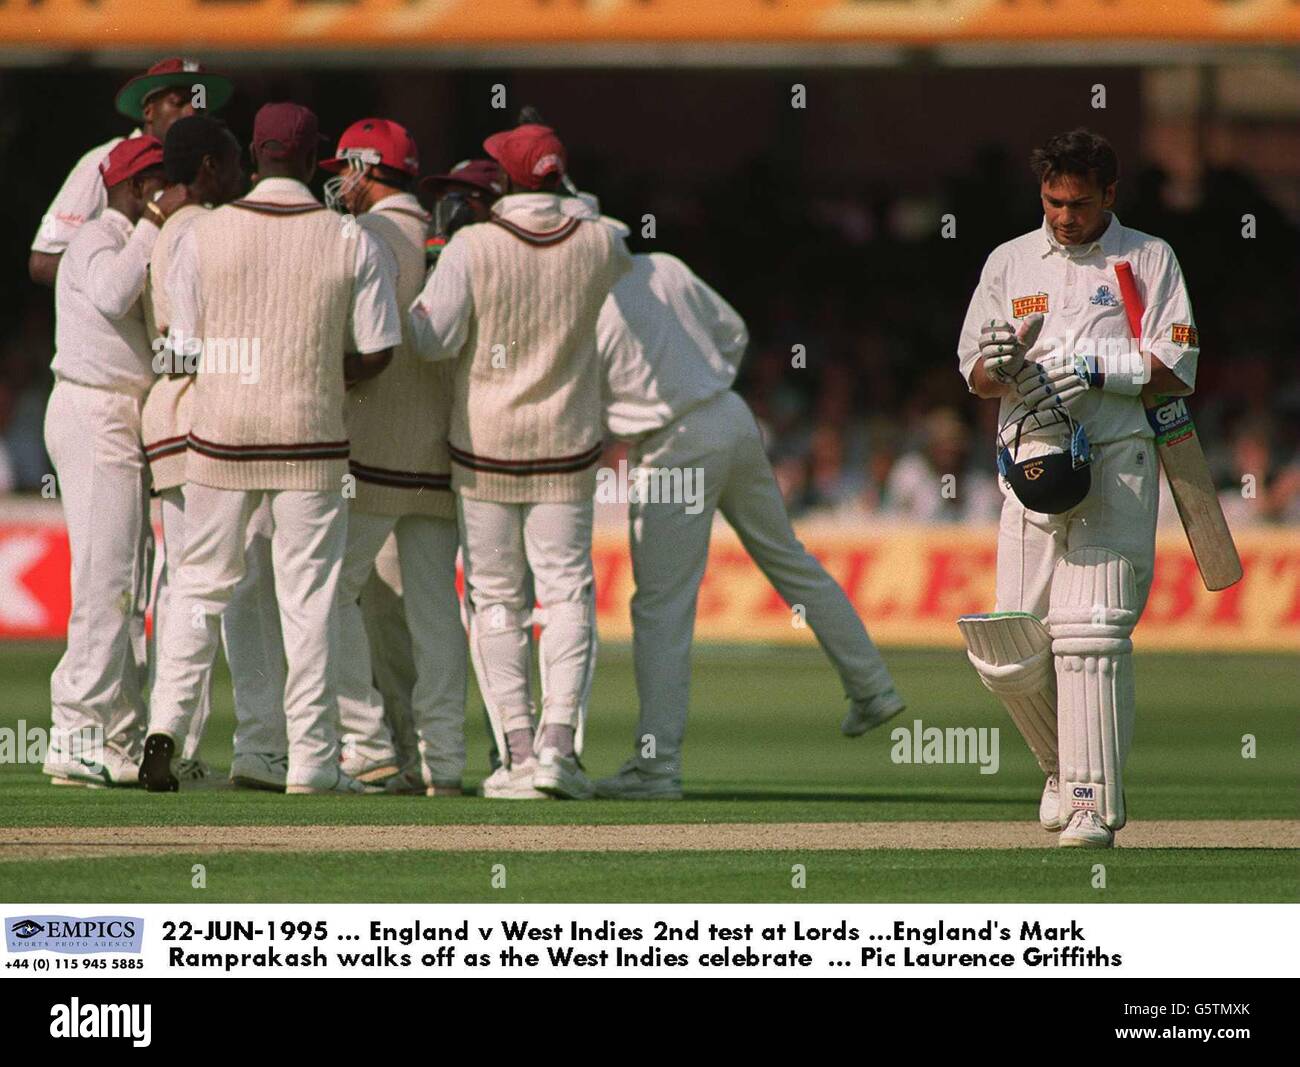 22-JUN-1995, England v West Indies 2nd test at Lords, England's Mark Ramprakash walks off as the West Indies celebrate Stock Photo